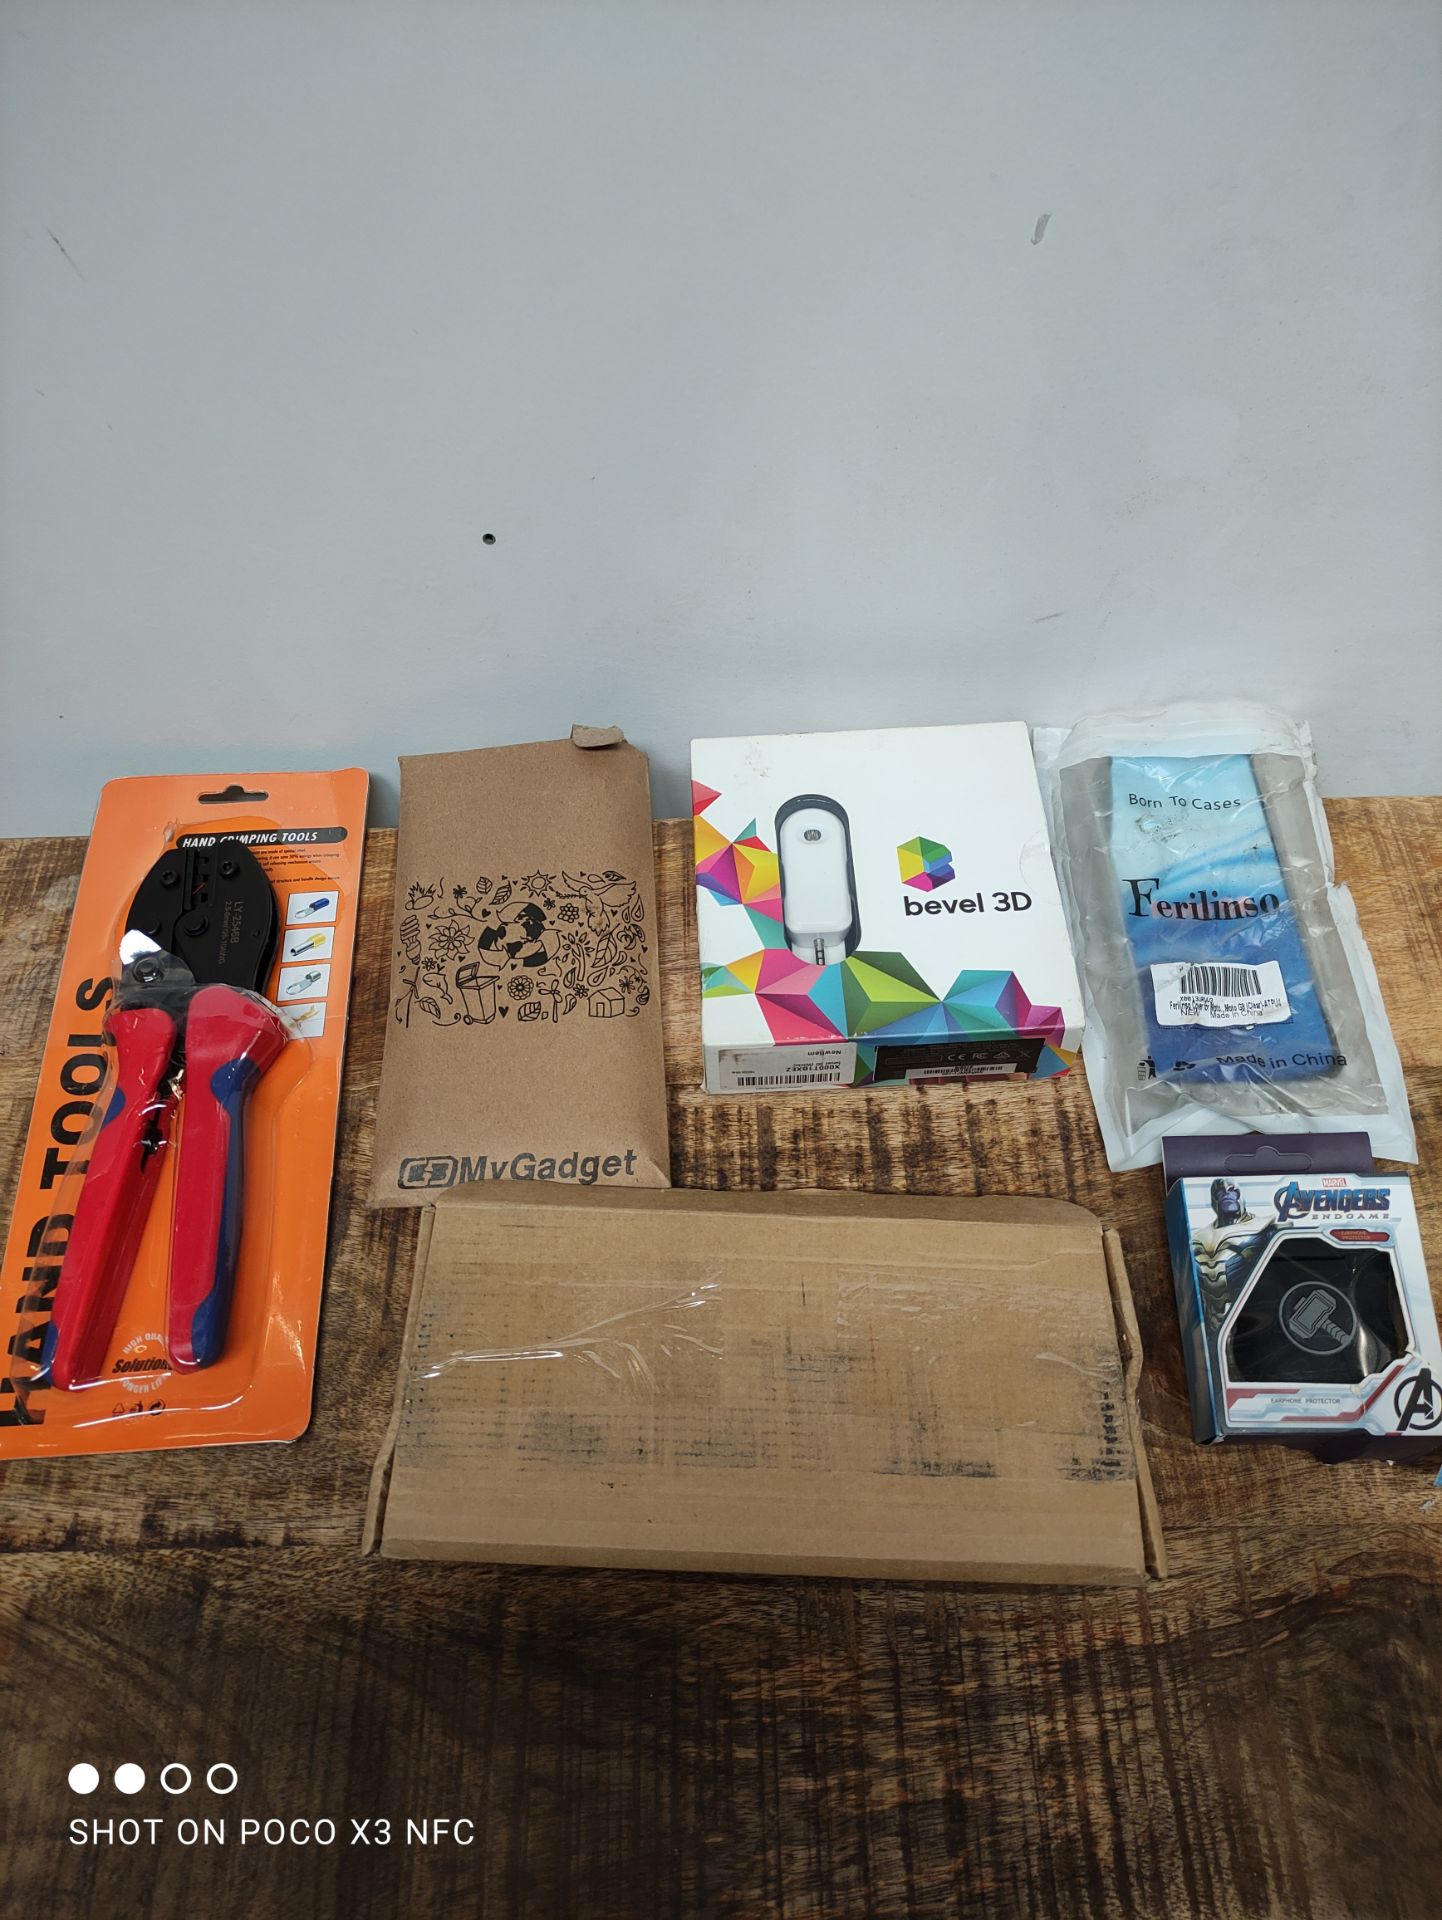 1 LOT TO CONTAIN 6 ASSORTED ITEMS TO INCLUDE HAND TOOL/PHONE CASES AND OTHER (IMAGE DEPICTS